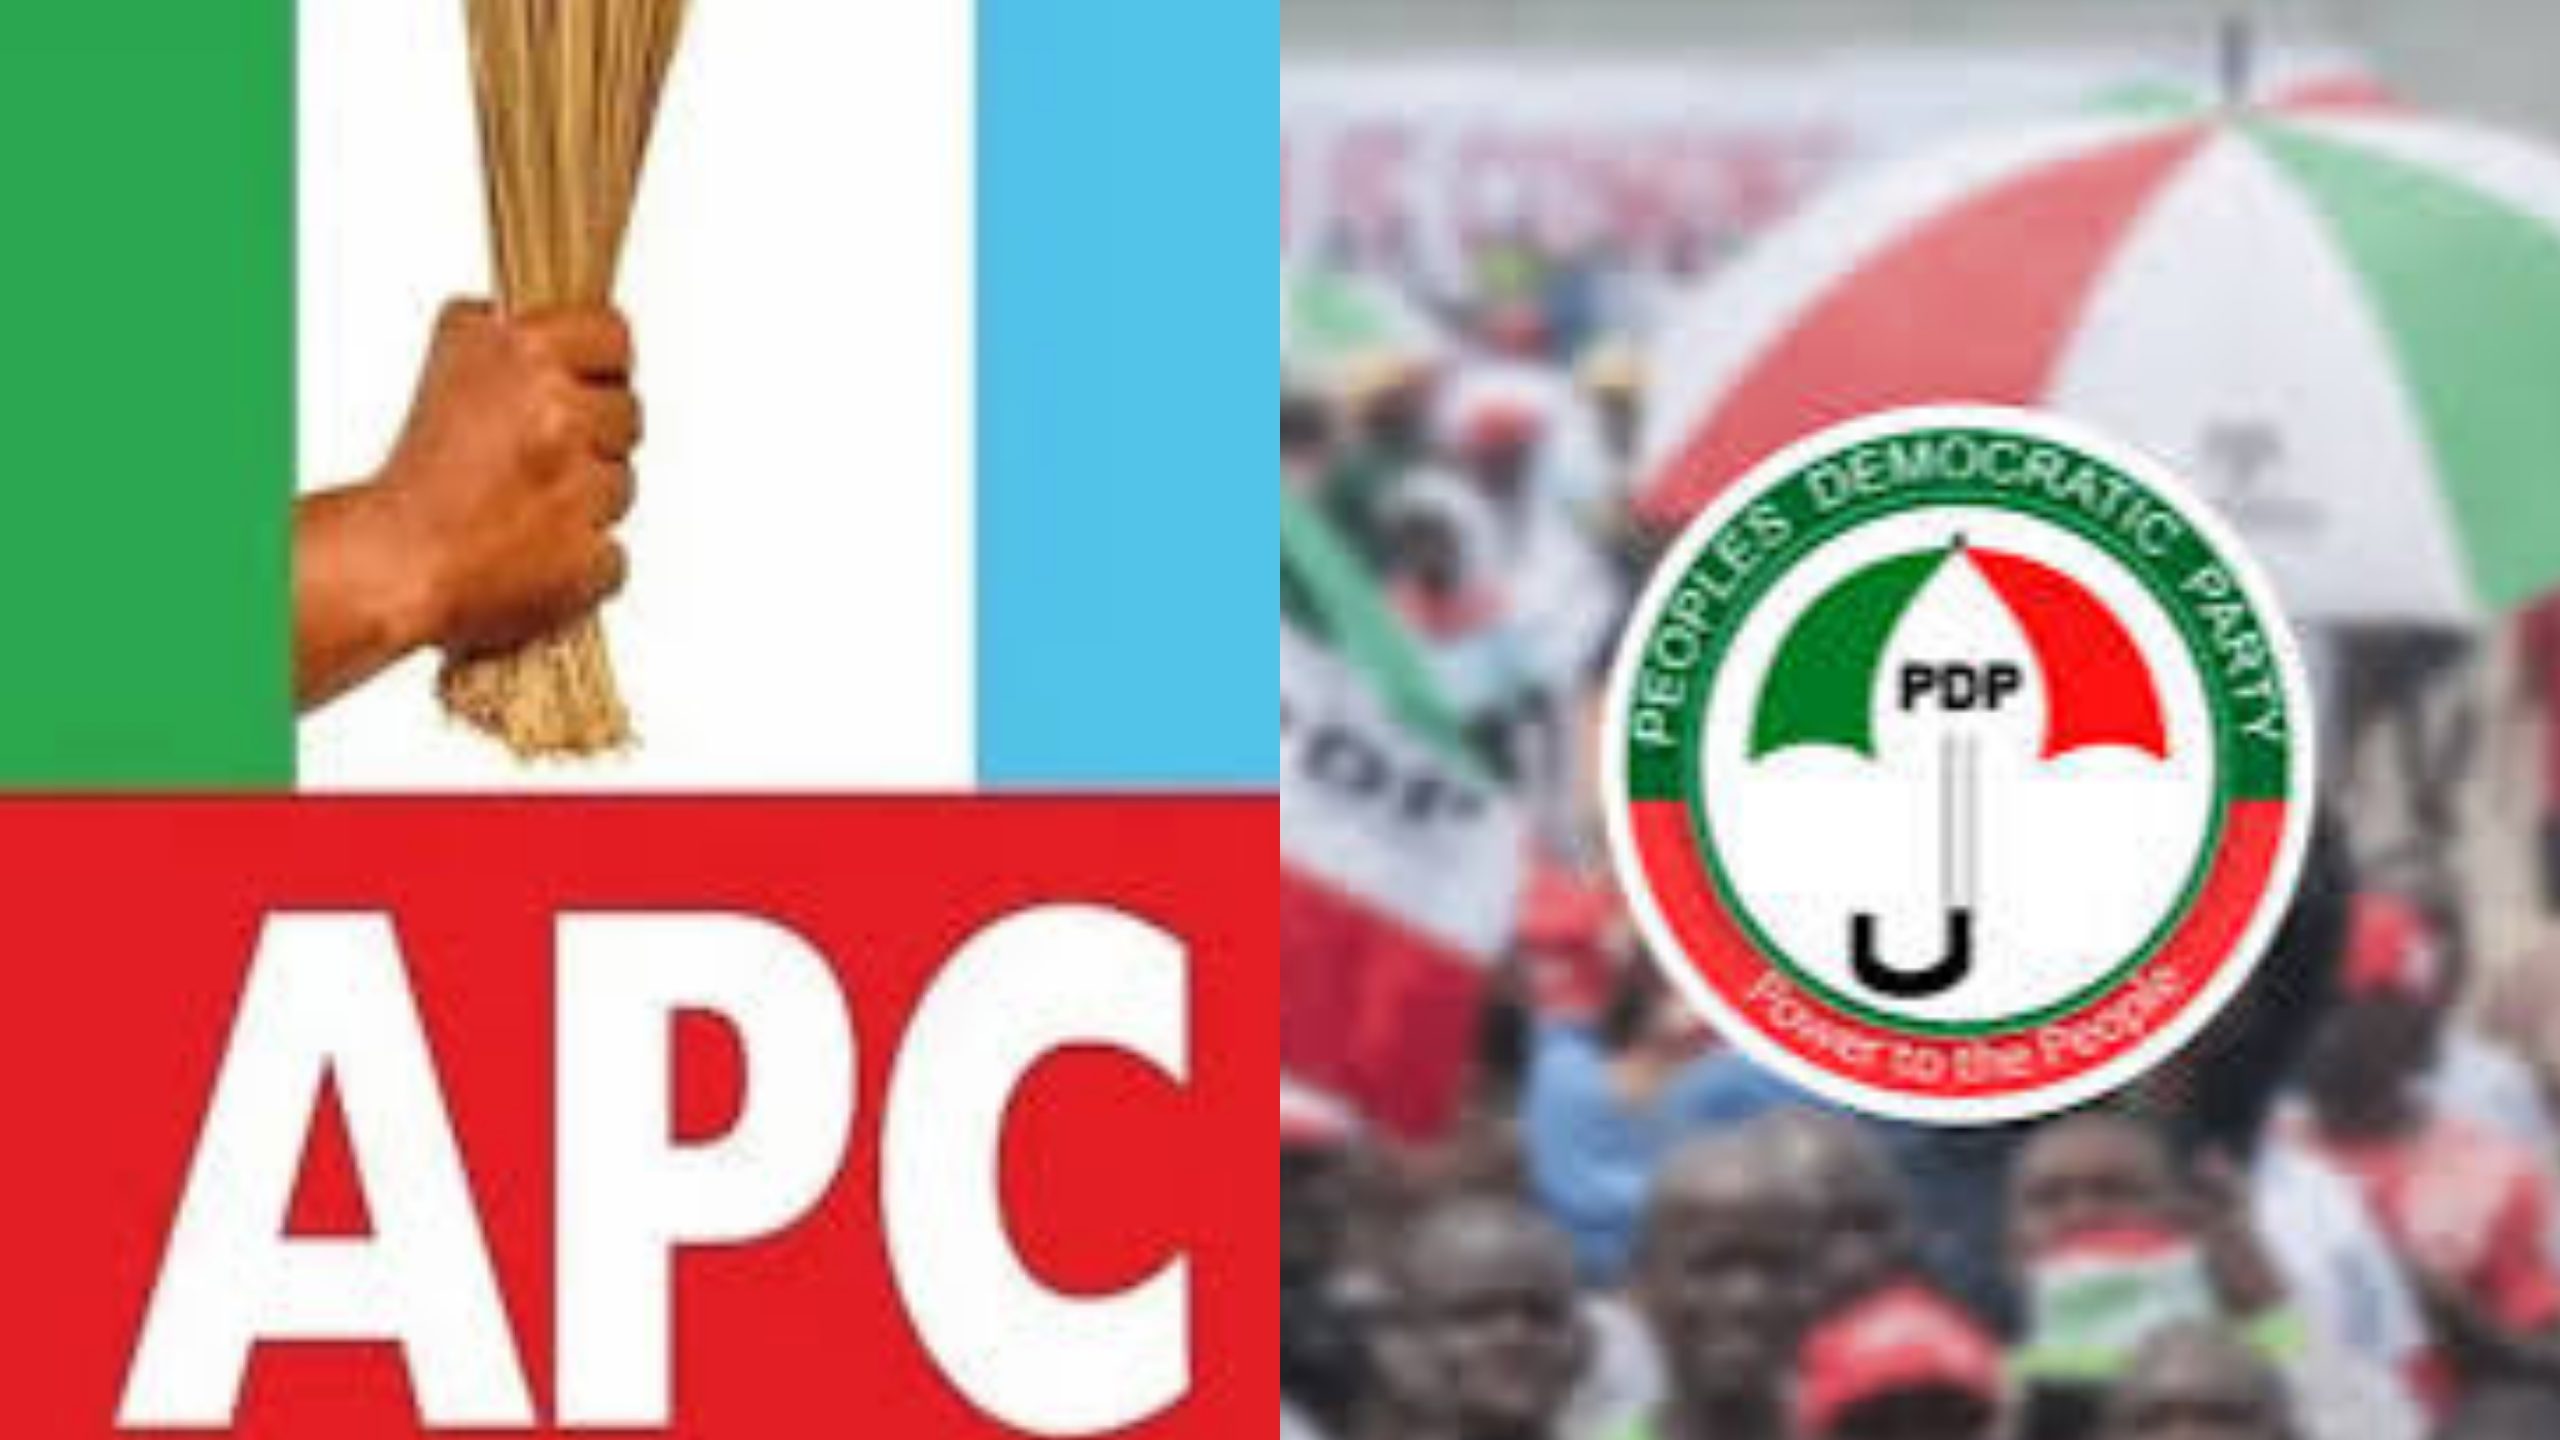 Former PDP Candidate Leads 2,000 Strong Defection to APC